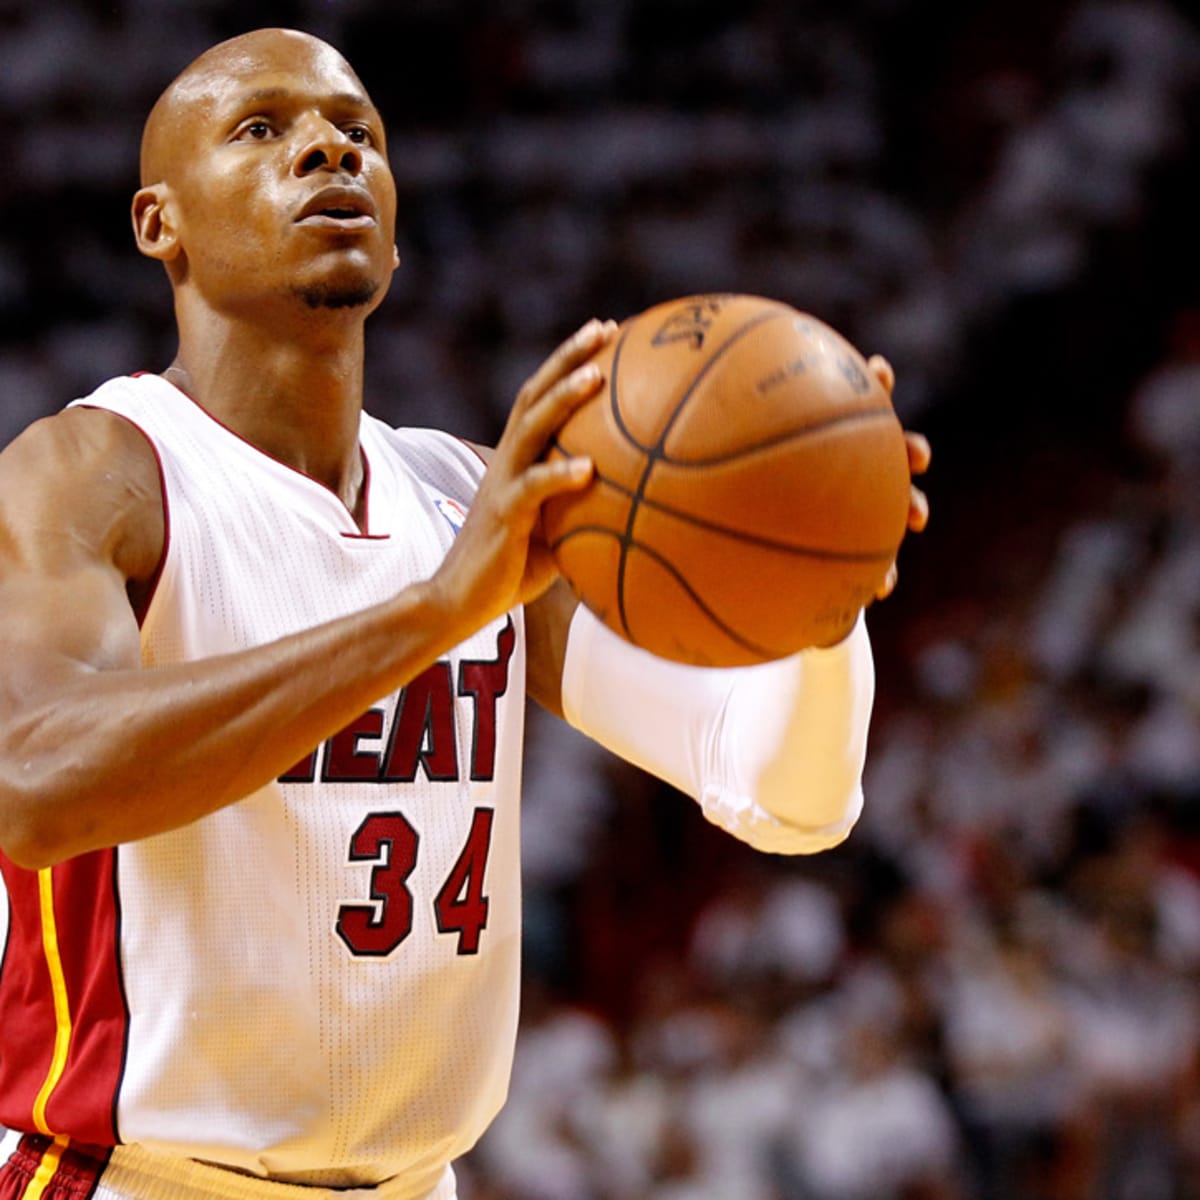 Retired NBA champion Ray Allen recovering after bicycle accident